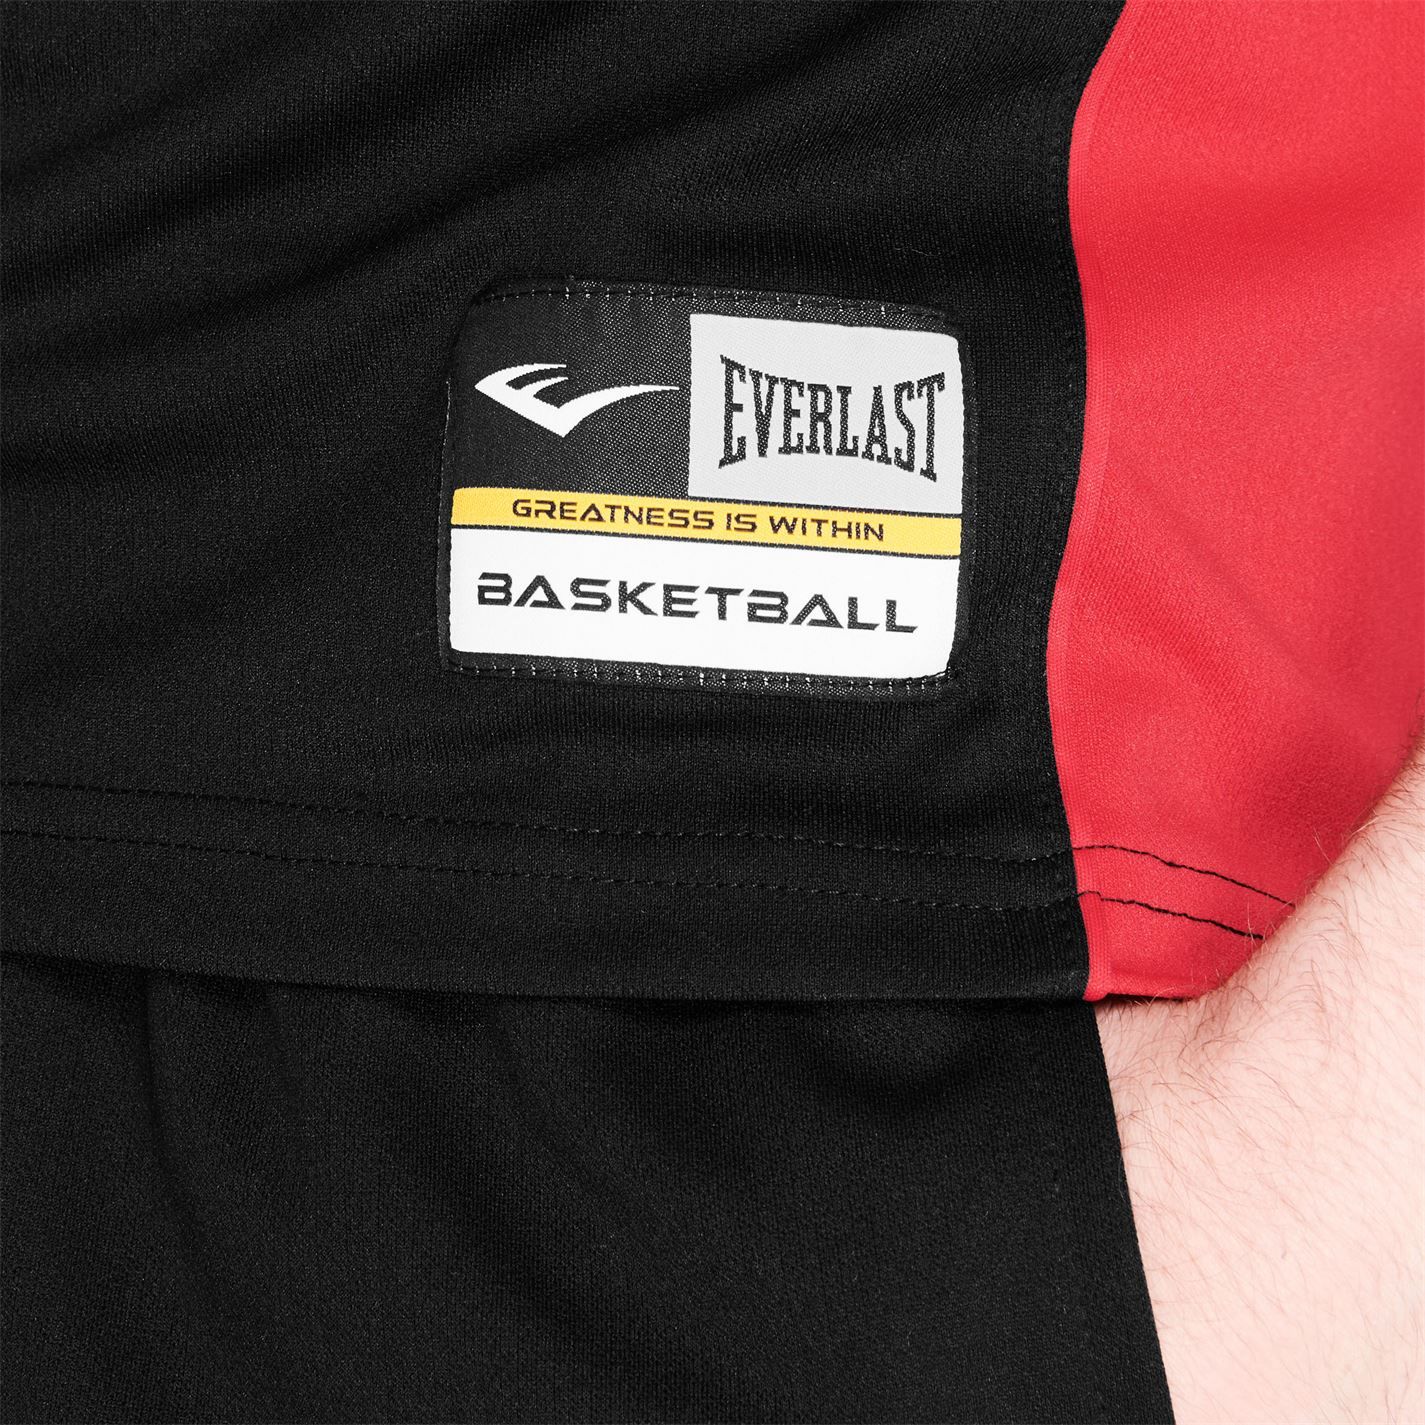 <h2>Everlast Basketball Jersey Mens</h2>
Show off your skills on the court whilst staying cool under pressure in this Everlast Basketball Jersey. The jersey is designed with a v-neck collar and a sleeveless style for a comfortable fit and benefits from a mesh back panel for breathability and ventilation to improve body temperature. Contrasting panels and Everlast branding finishes off the design of the jersey for a great look.

> Mens basketball top
> Sleeveless
> V-neck
> Mesh back
> Contrasting panels
> Everlast branding
> 100% polyester
> Machine washable